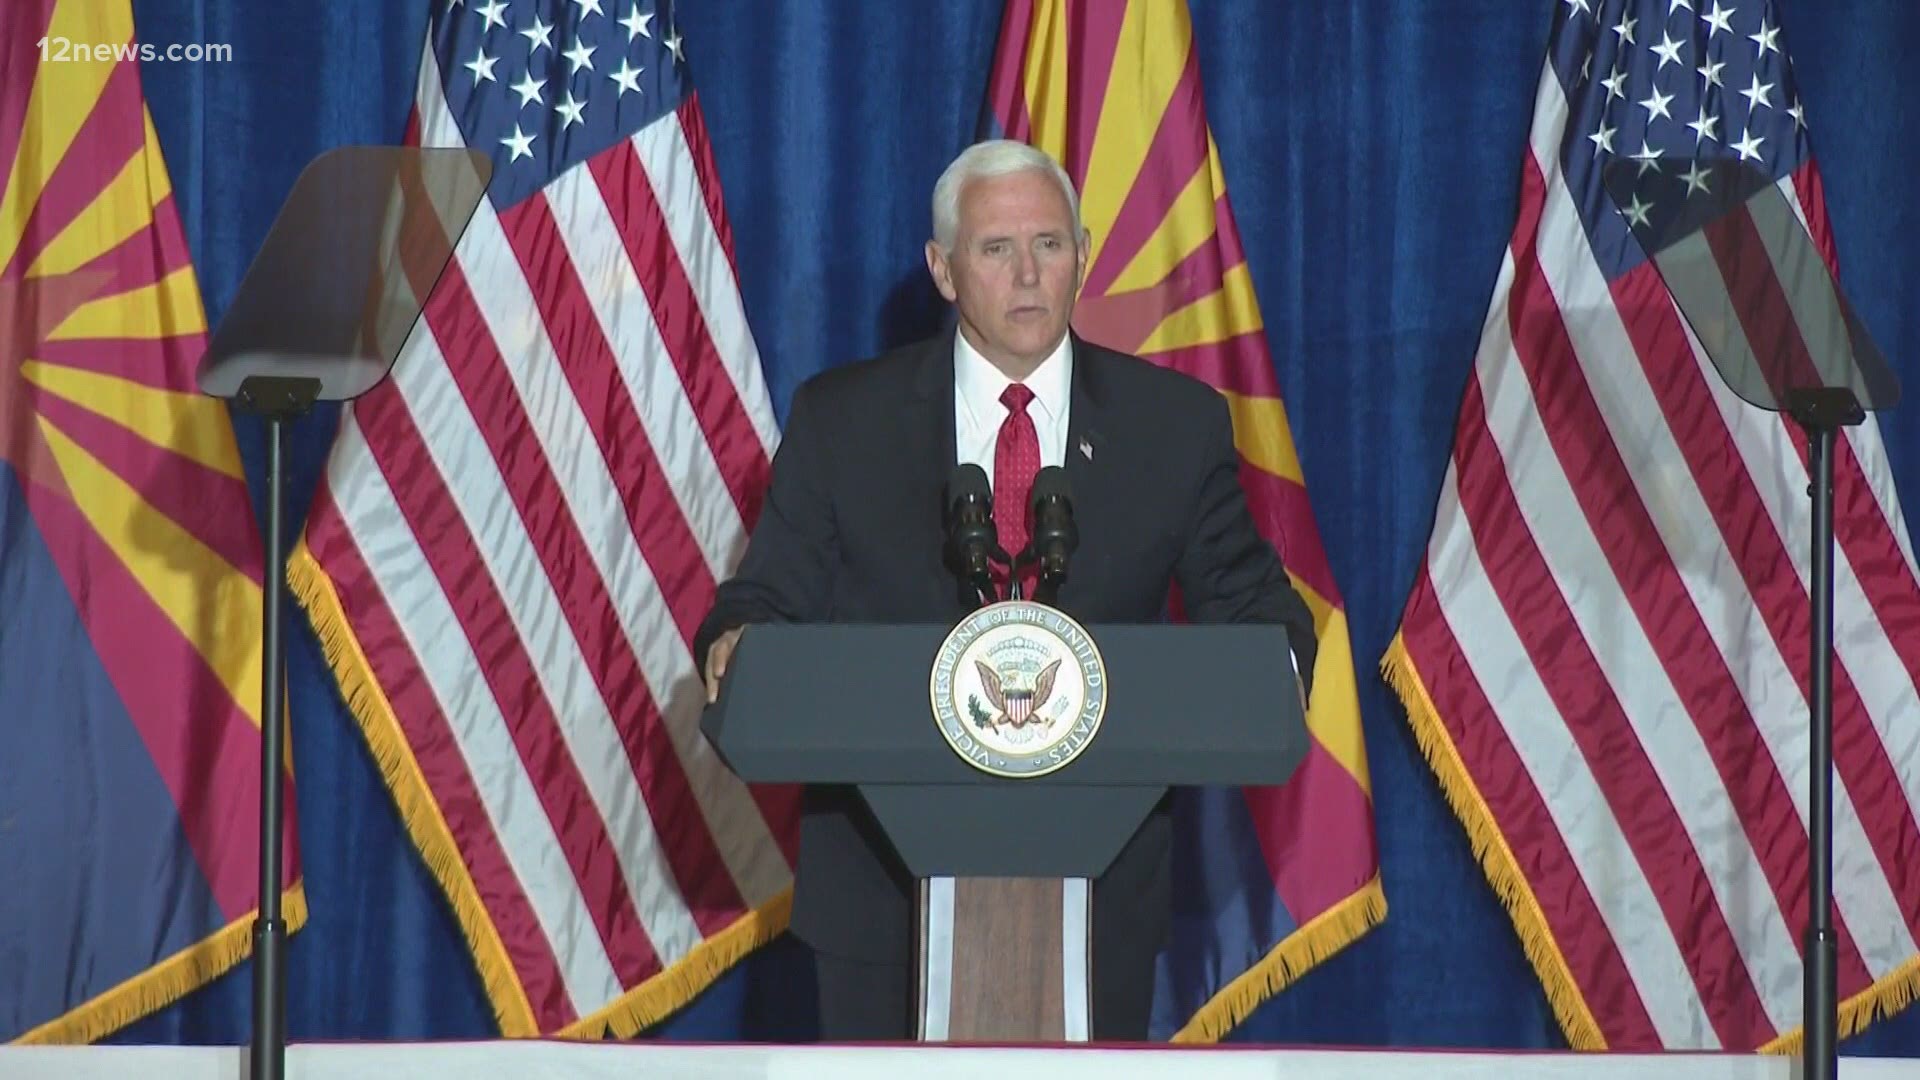 Vice President Mike Pence touched down in Phoenix Friday. His visit marks the fourth visit from members of the Trump administration this week.